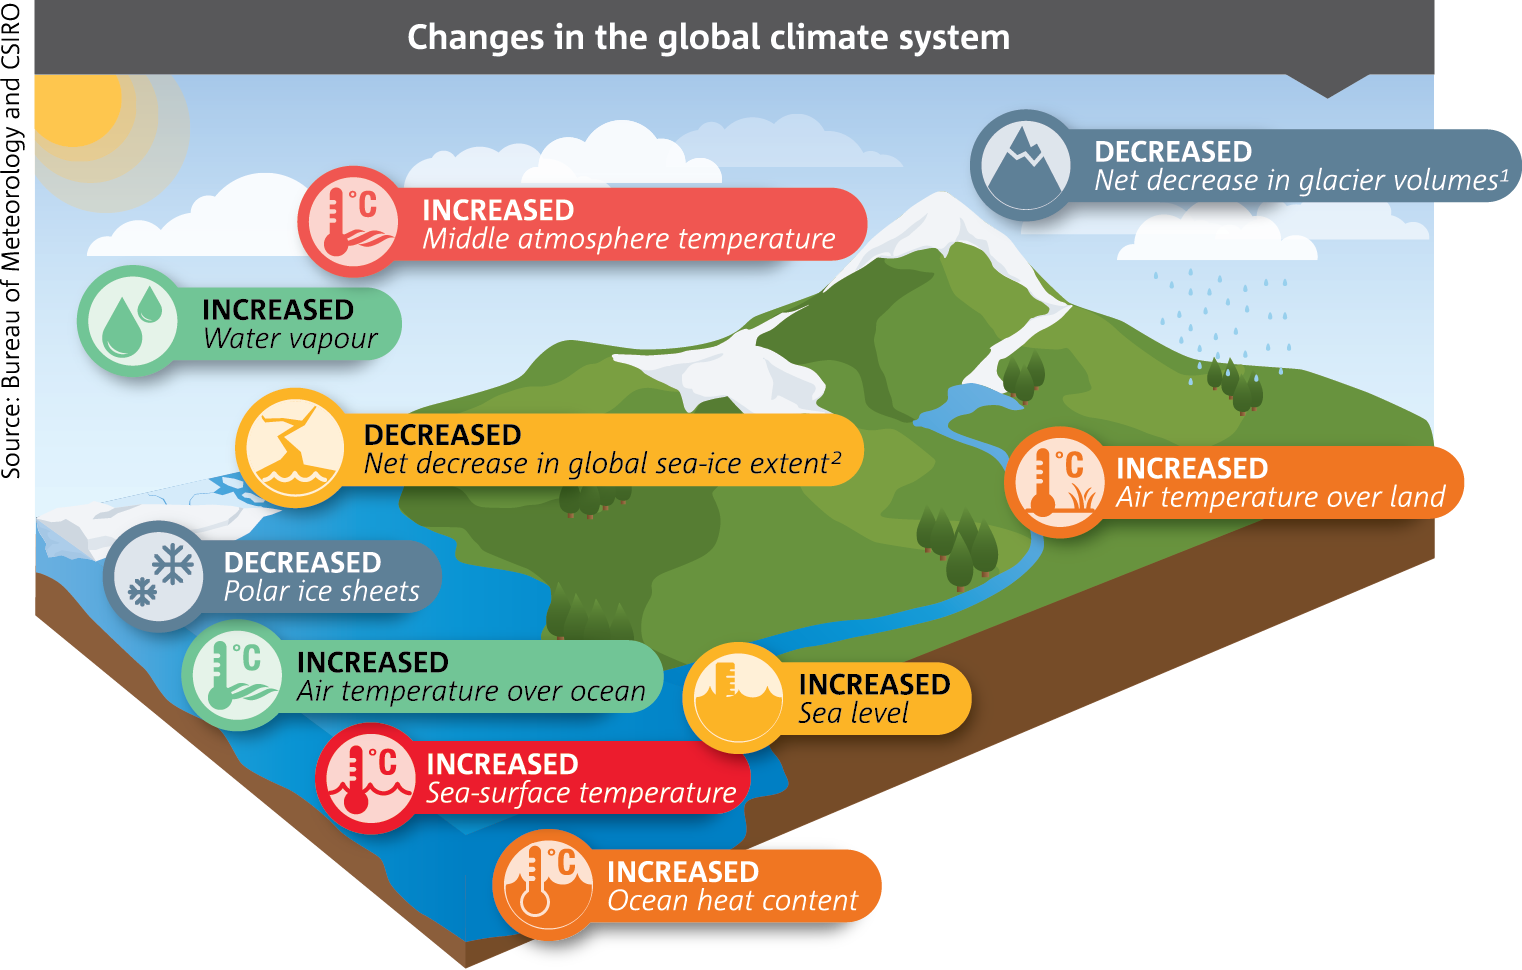 Global Climate System Changes Infographic